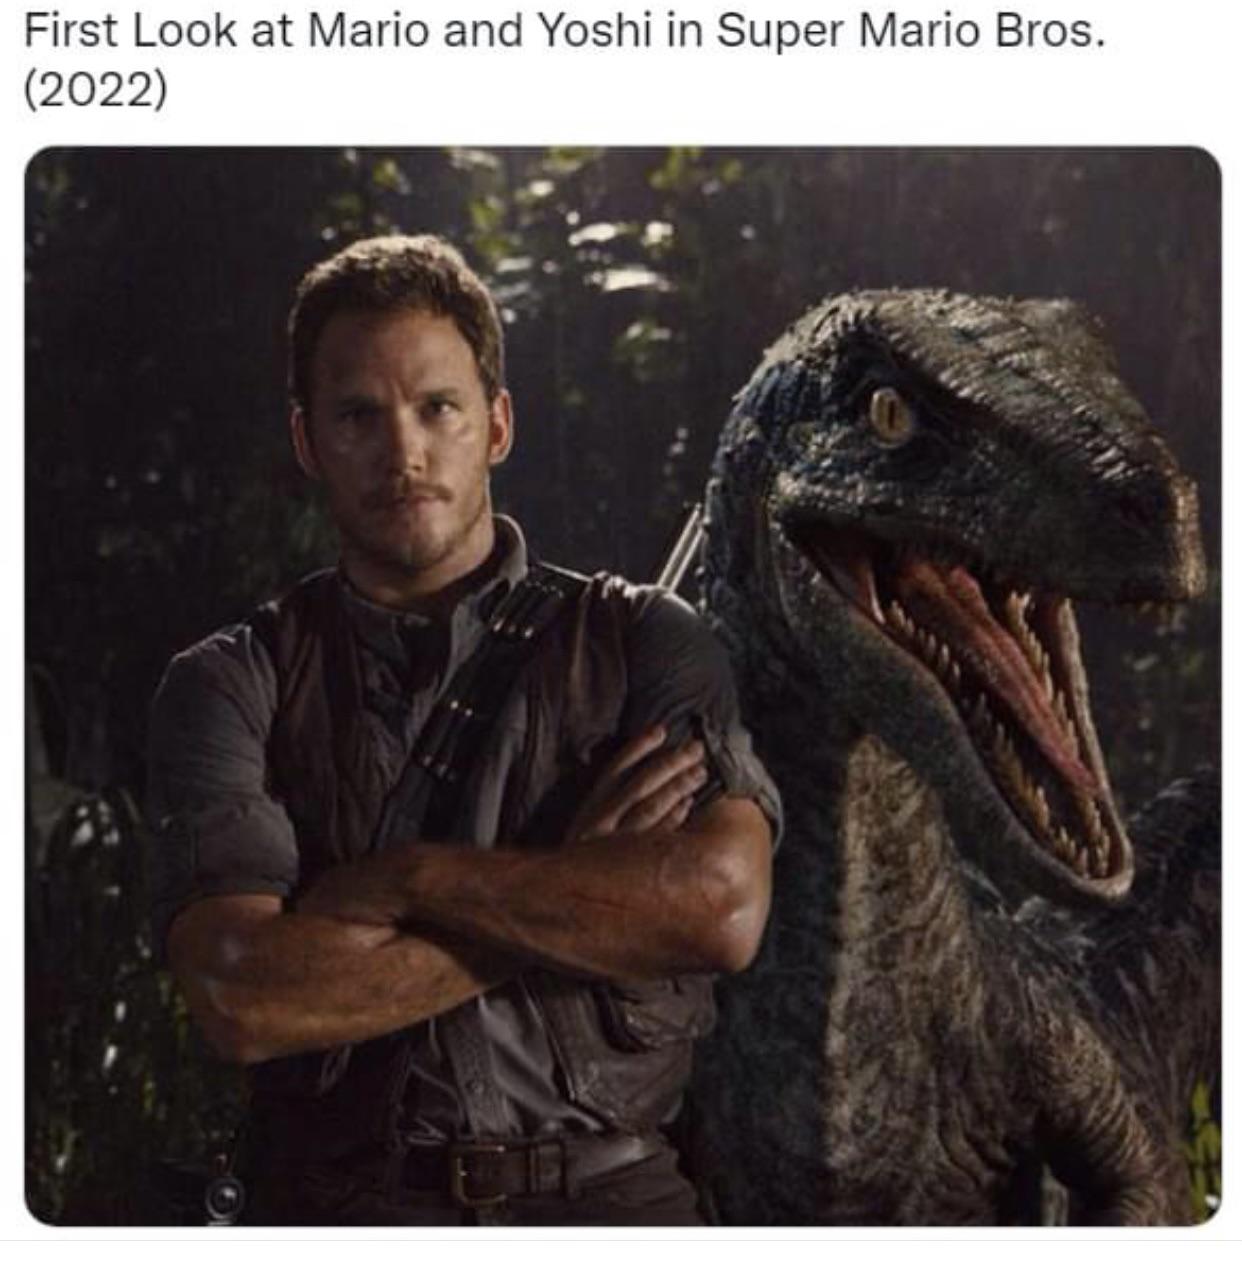 jurassic world x oc fanfiction - First Look at Mario and Yoshi in Super Mario Bros. 2022